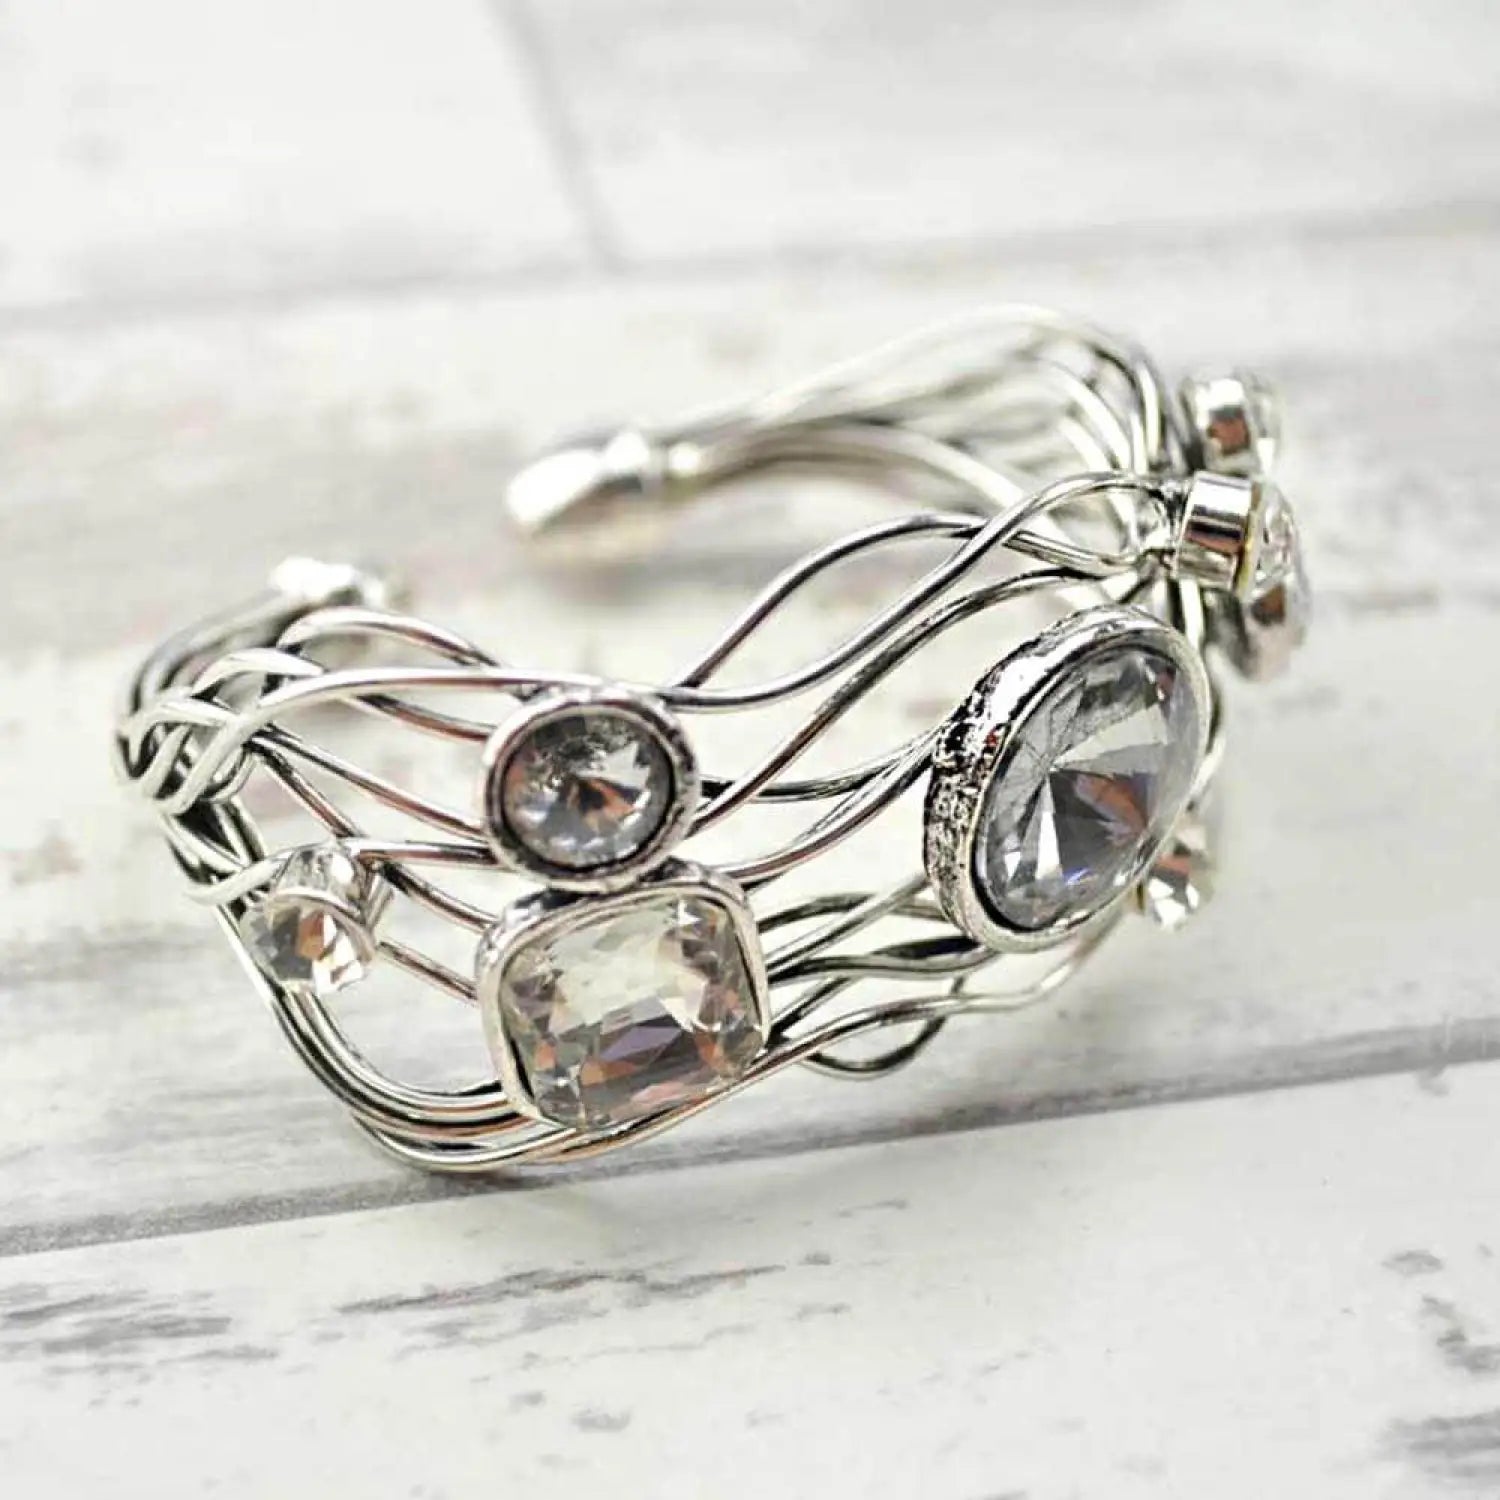 Multi-layered statement bracelet with silver ring and center stone